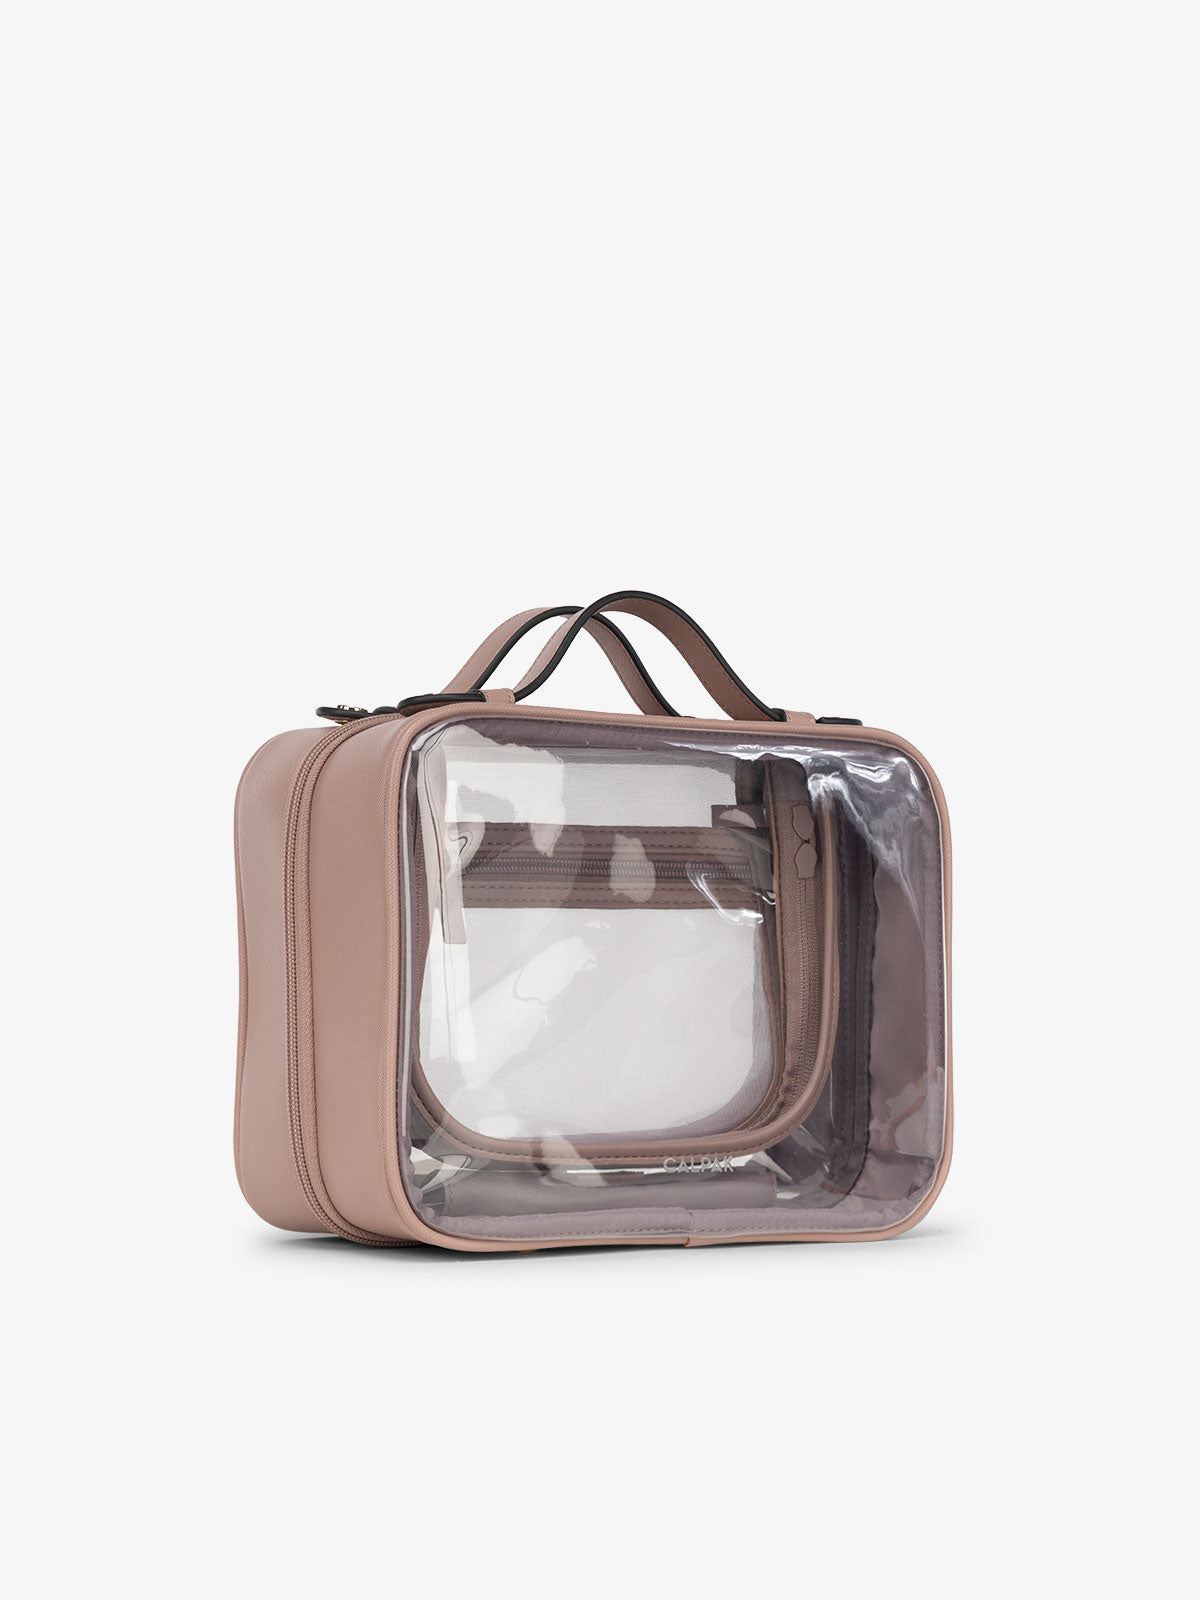 CALPAK medium clear cosmetics case with sturdy handles and zippered compartments for travel in mauve